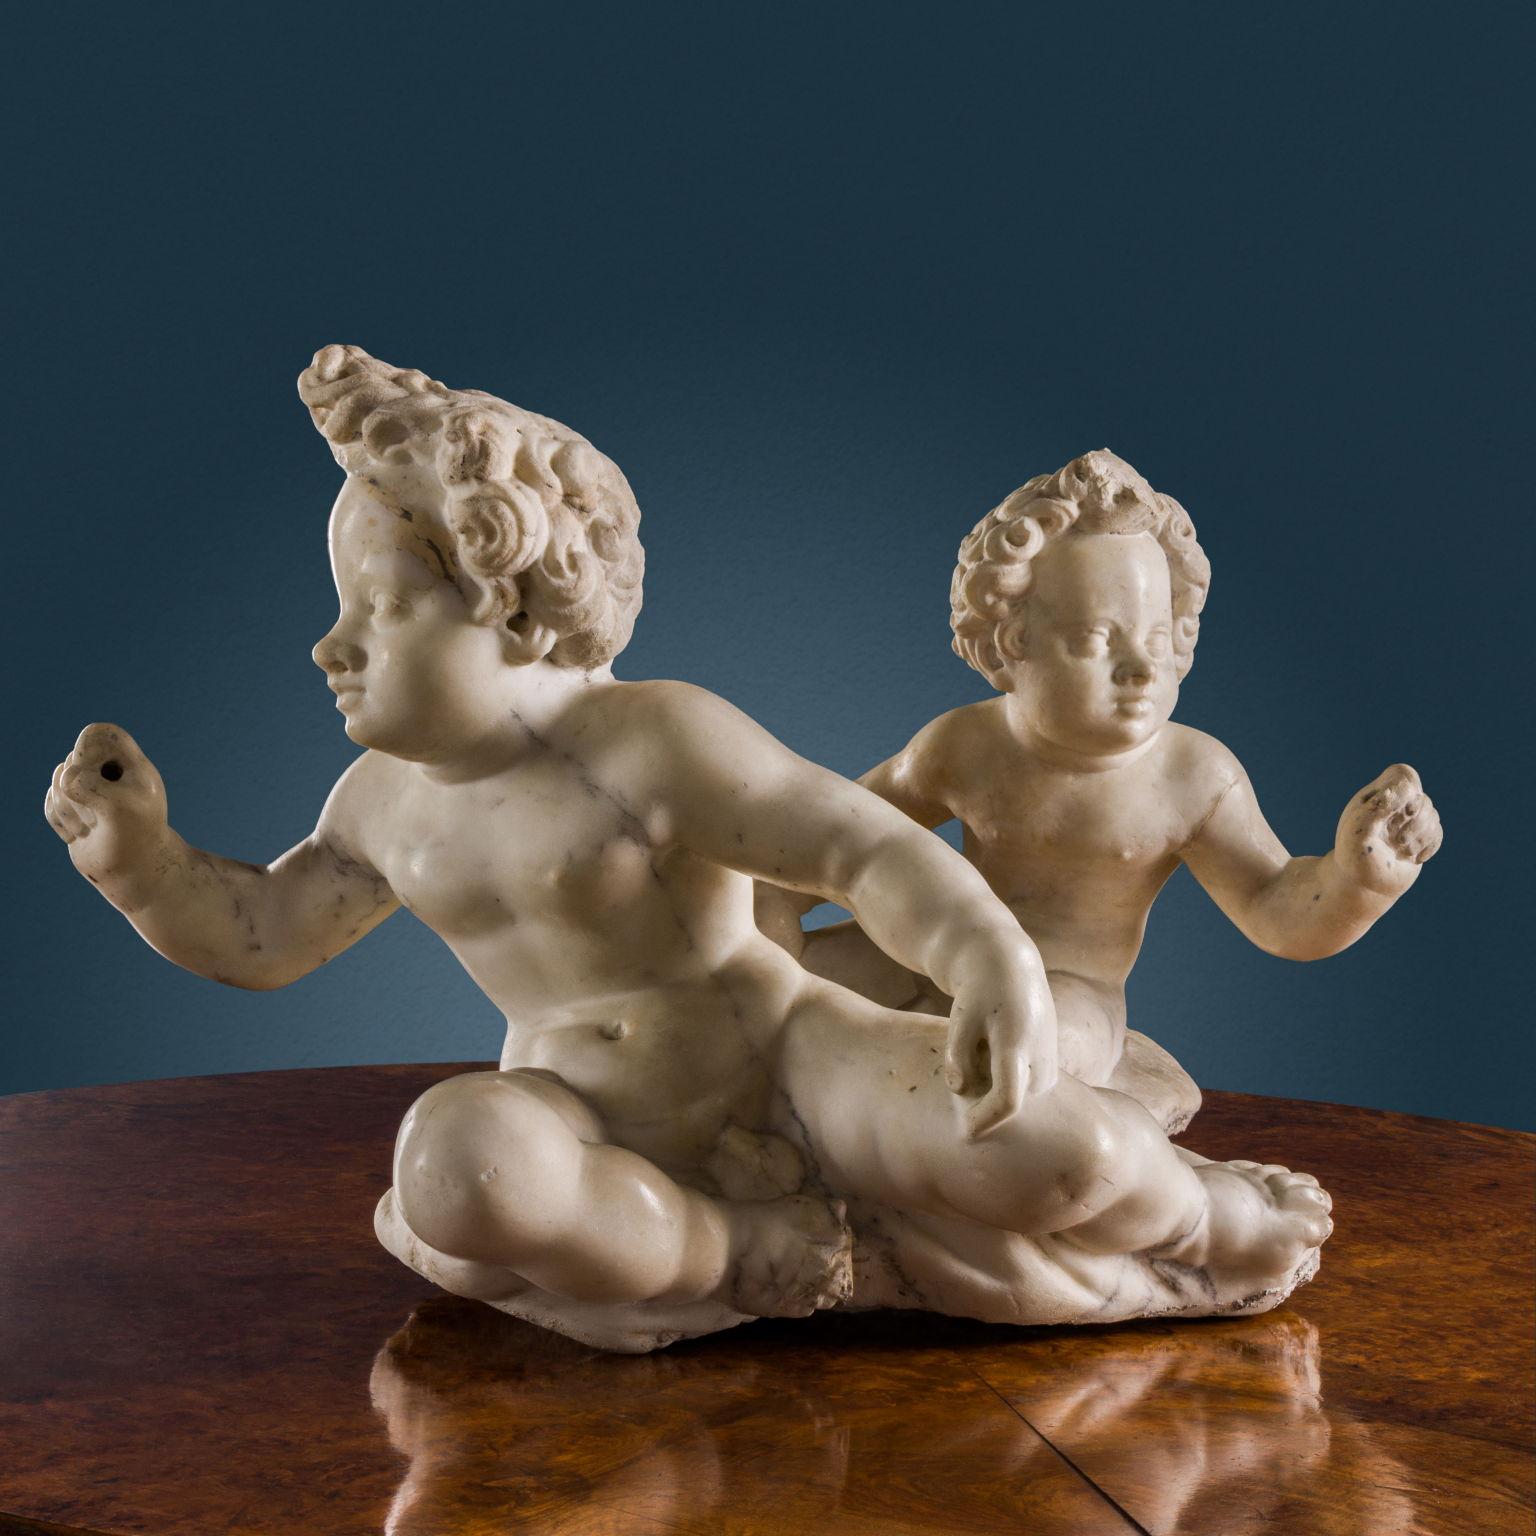 Carrara Marble Two Putti, c. 1640-1650. Giovanni Pietro and Carlo Carra (workshop of) For Sale